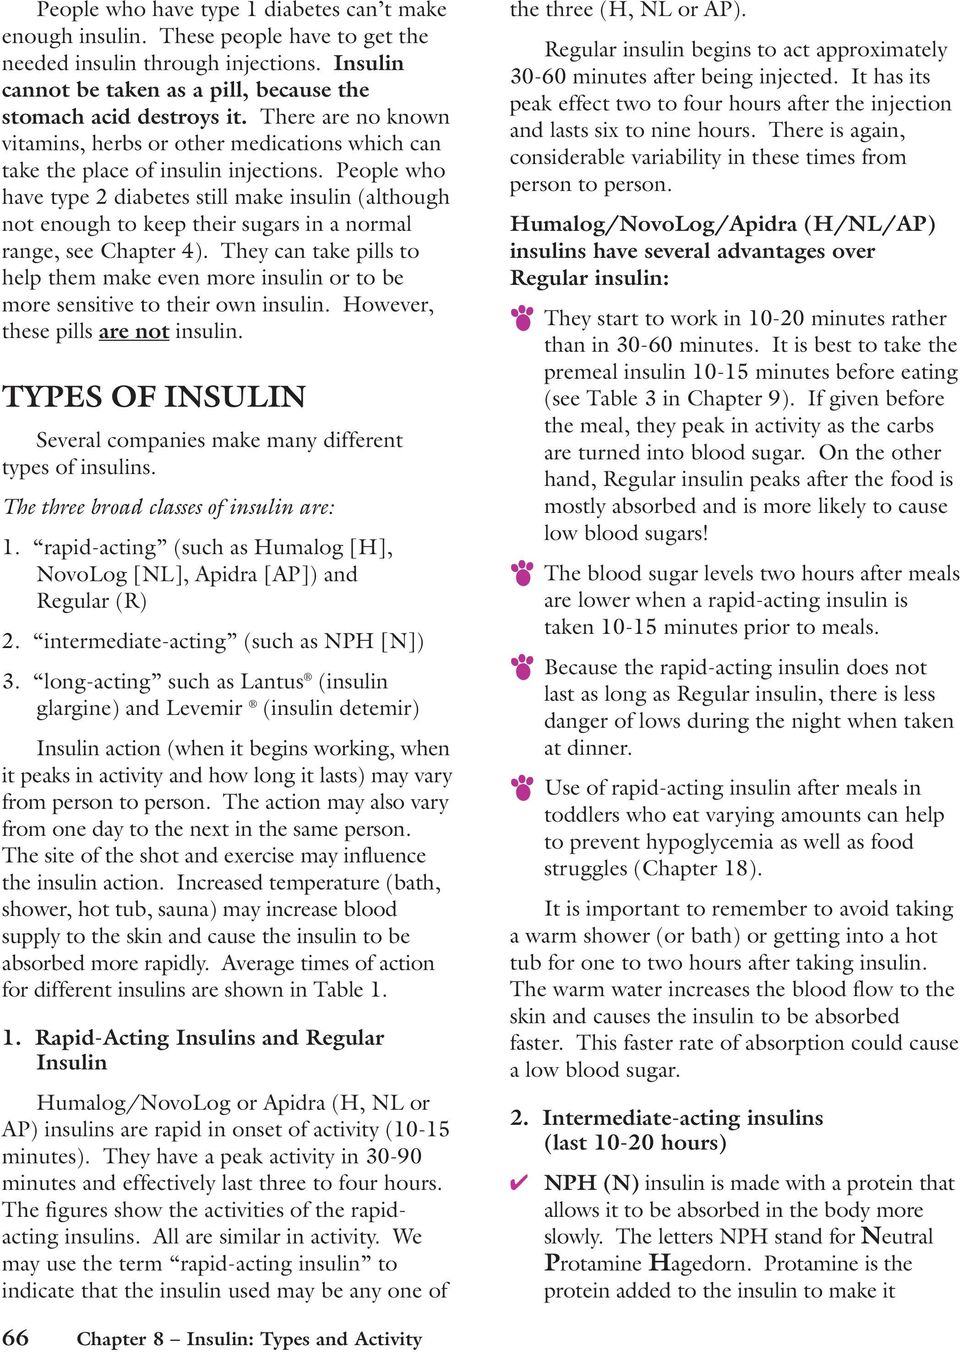 People who have type 2 diabetes still make insulin (although not enough to keep their sugars in a normal range, see Chapter 4).